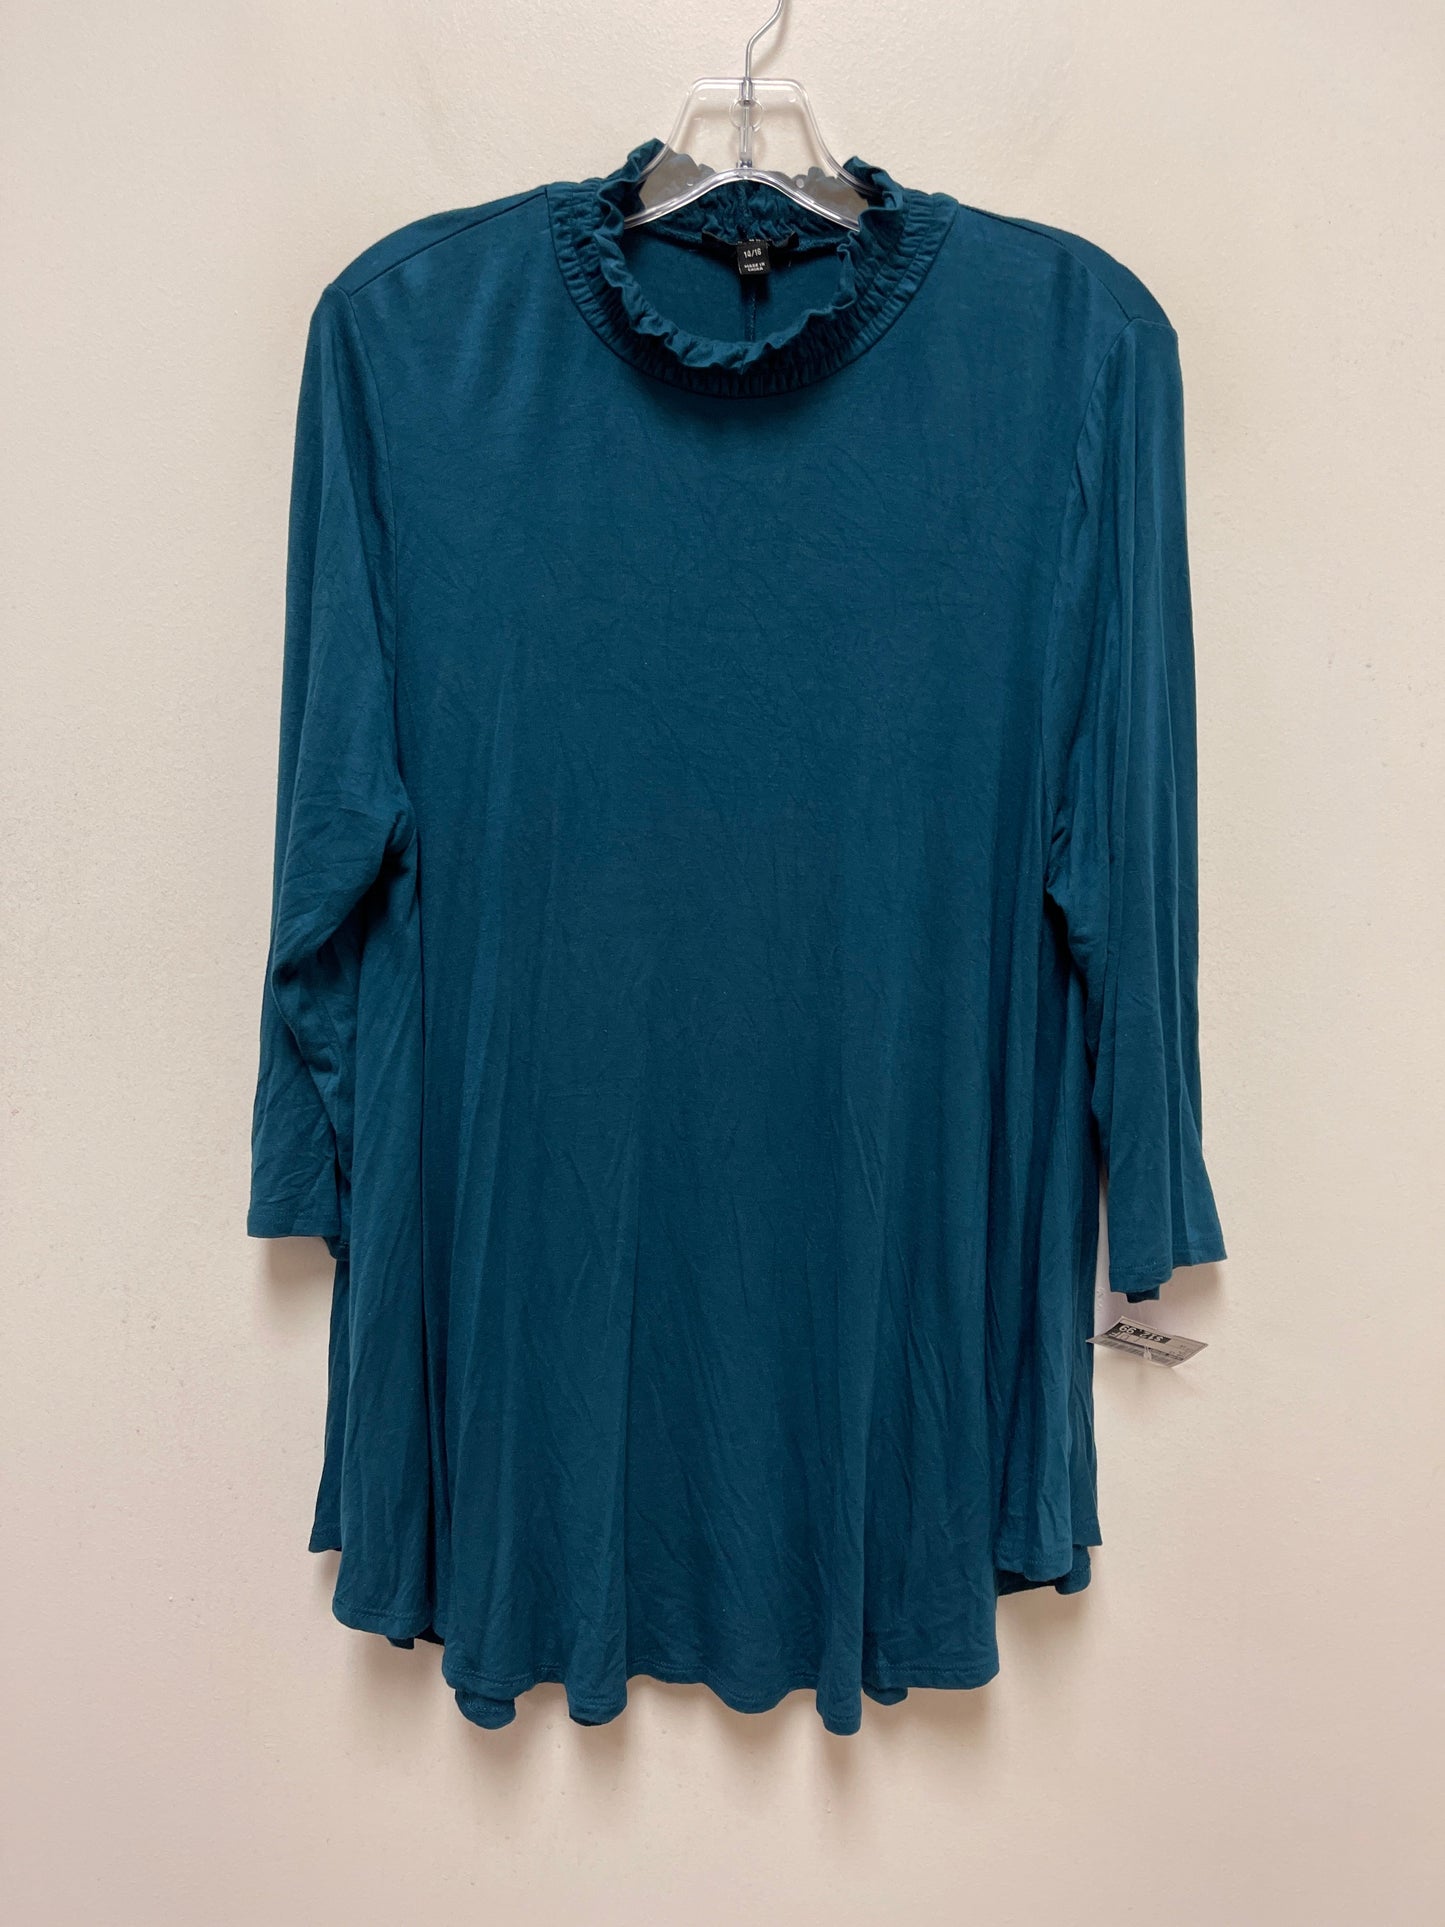 Teal Top Long Sleeve Lane Bryant, Size 1x